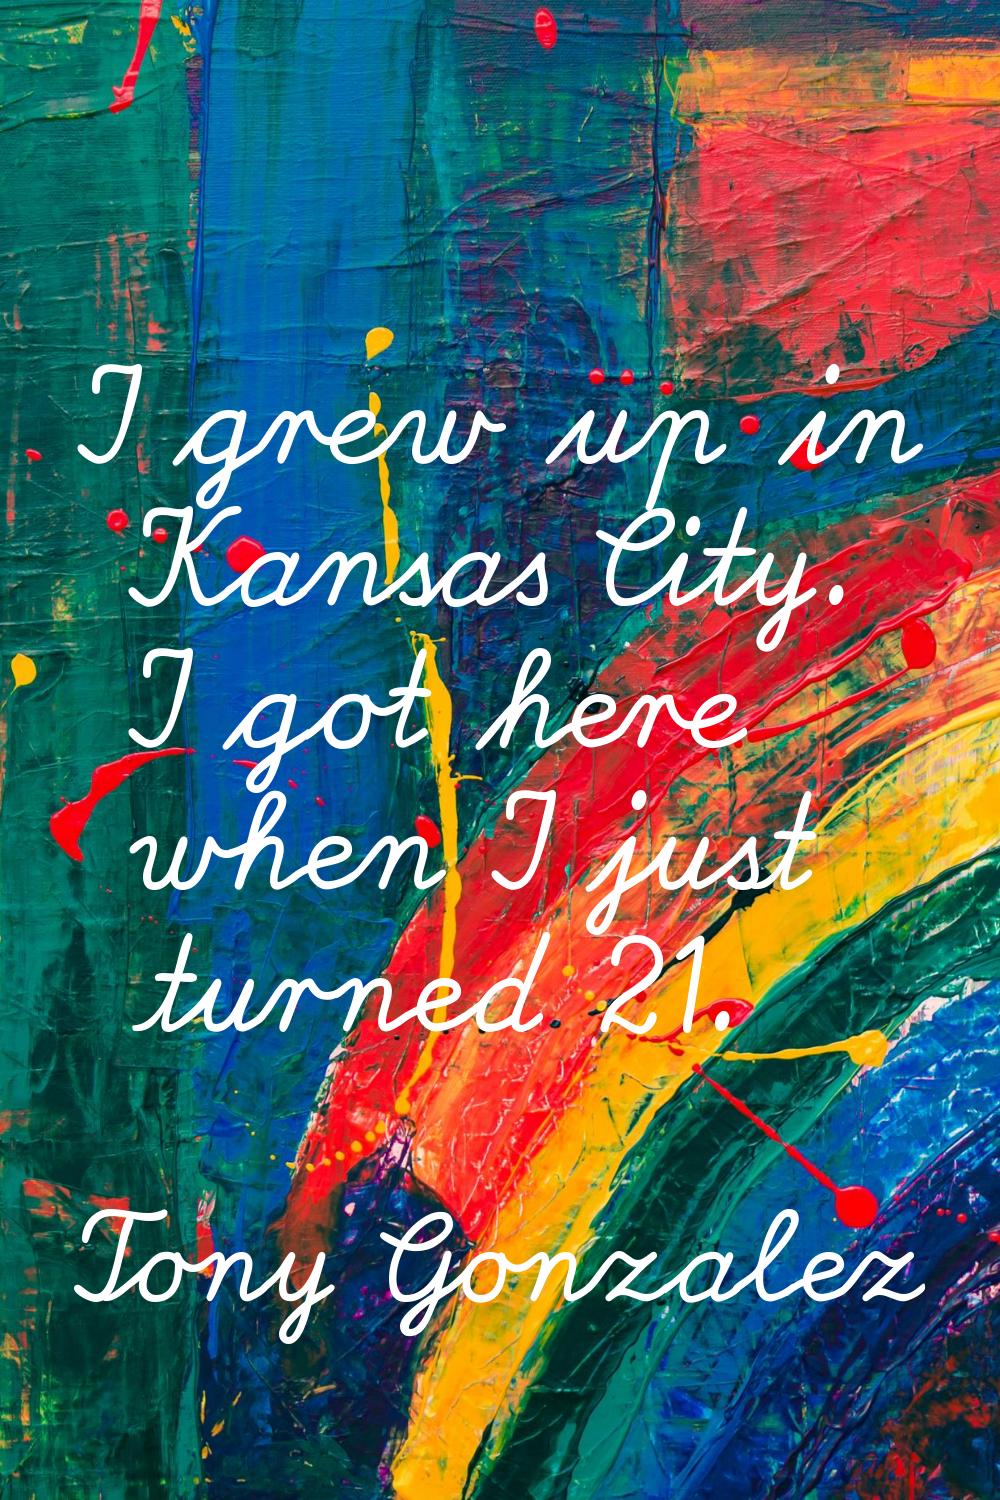 I grew up in Kansas City. I got here when I just turned 21.